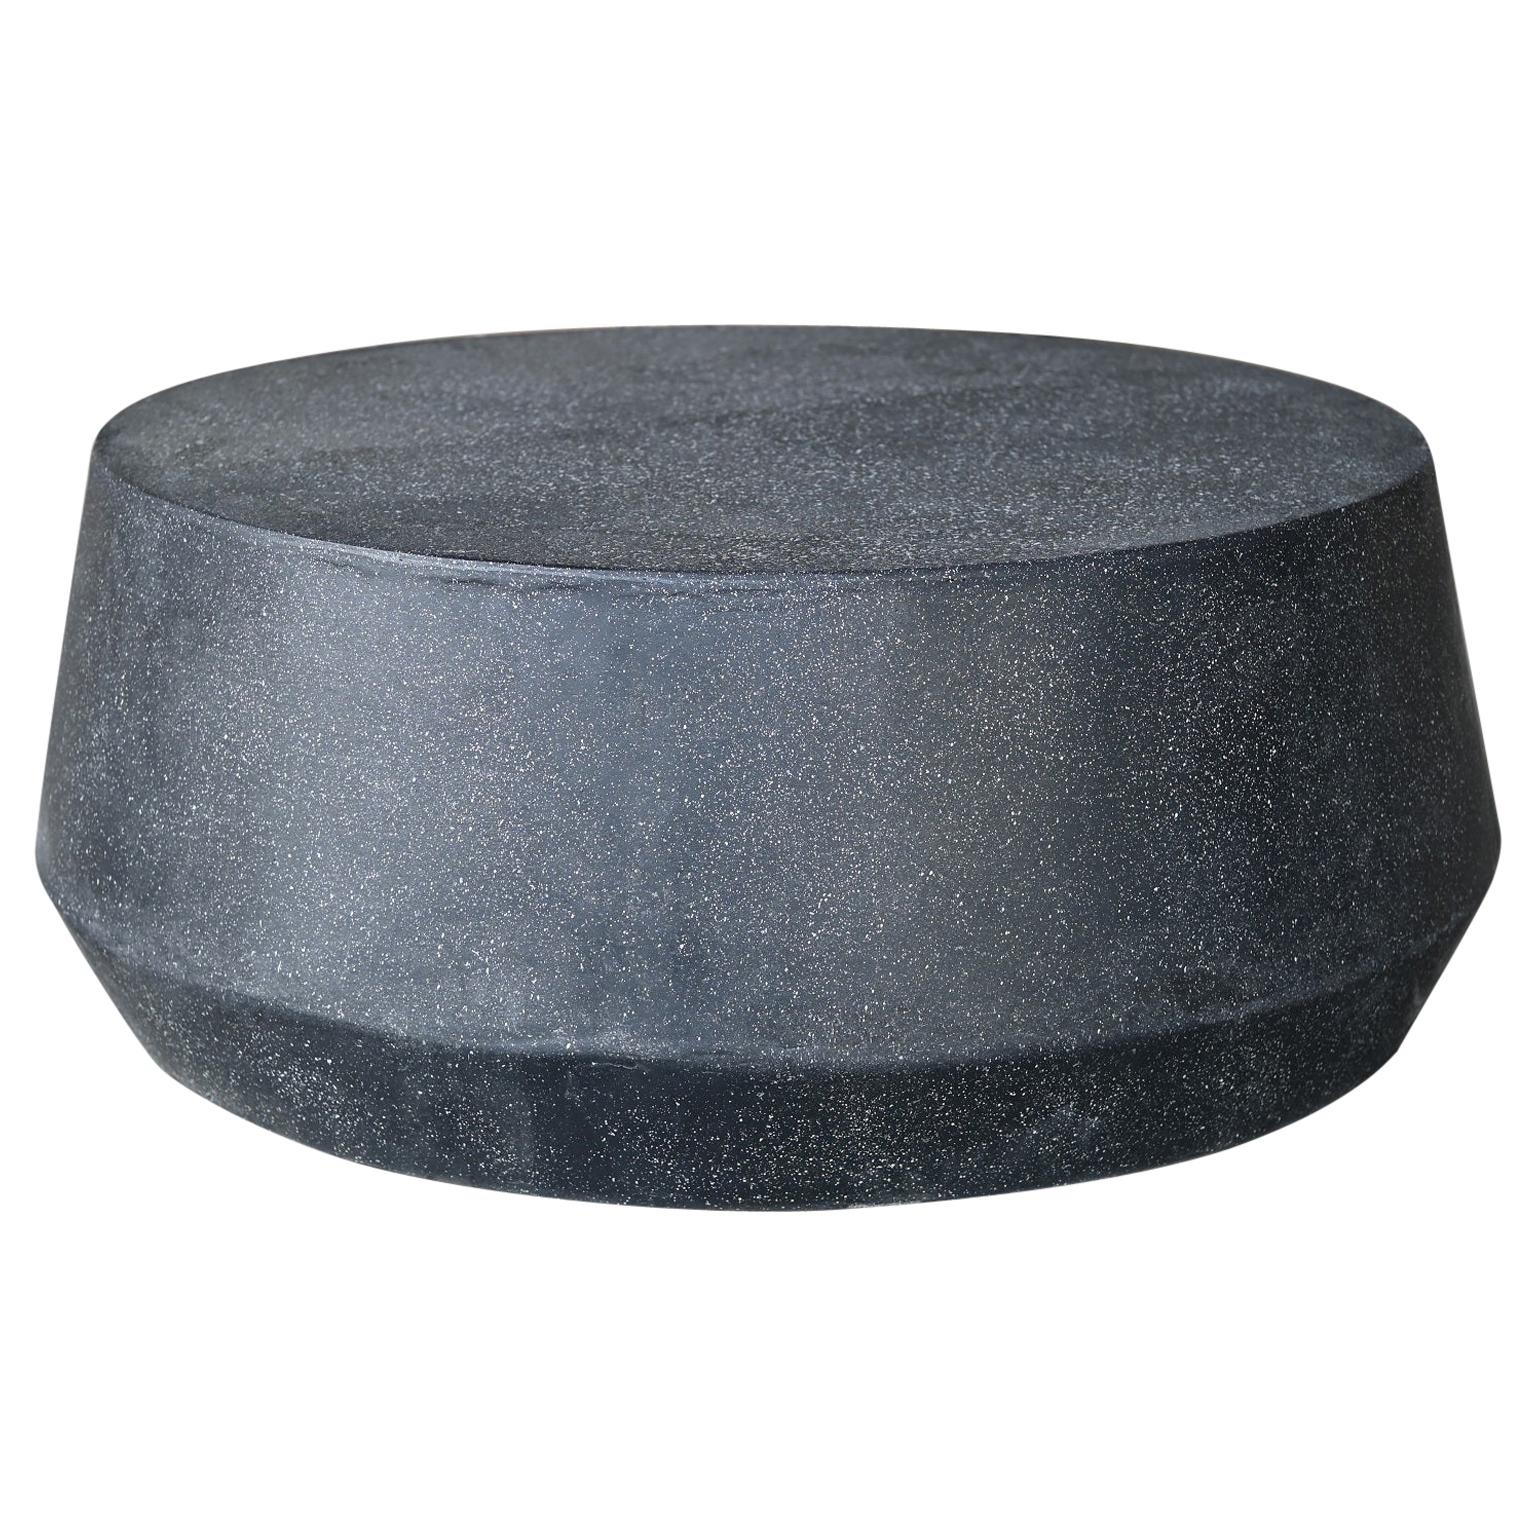 Cast Resin 'Tom' Low Table, Coal Stone Finish by Zachary A. Design